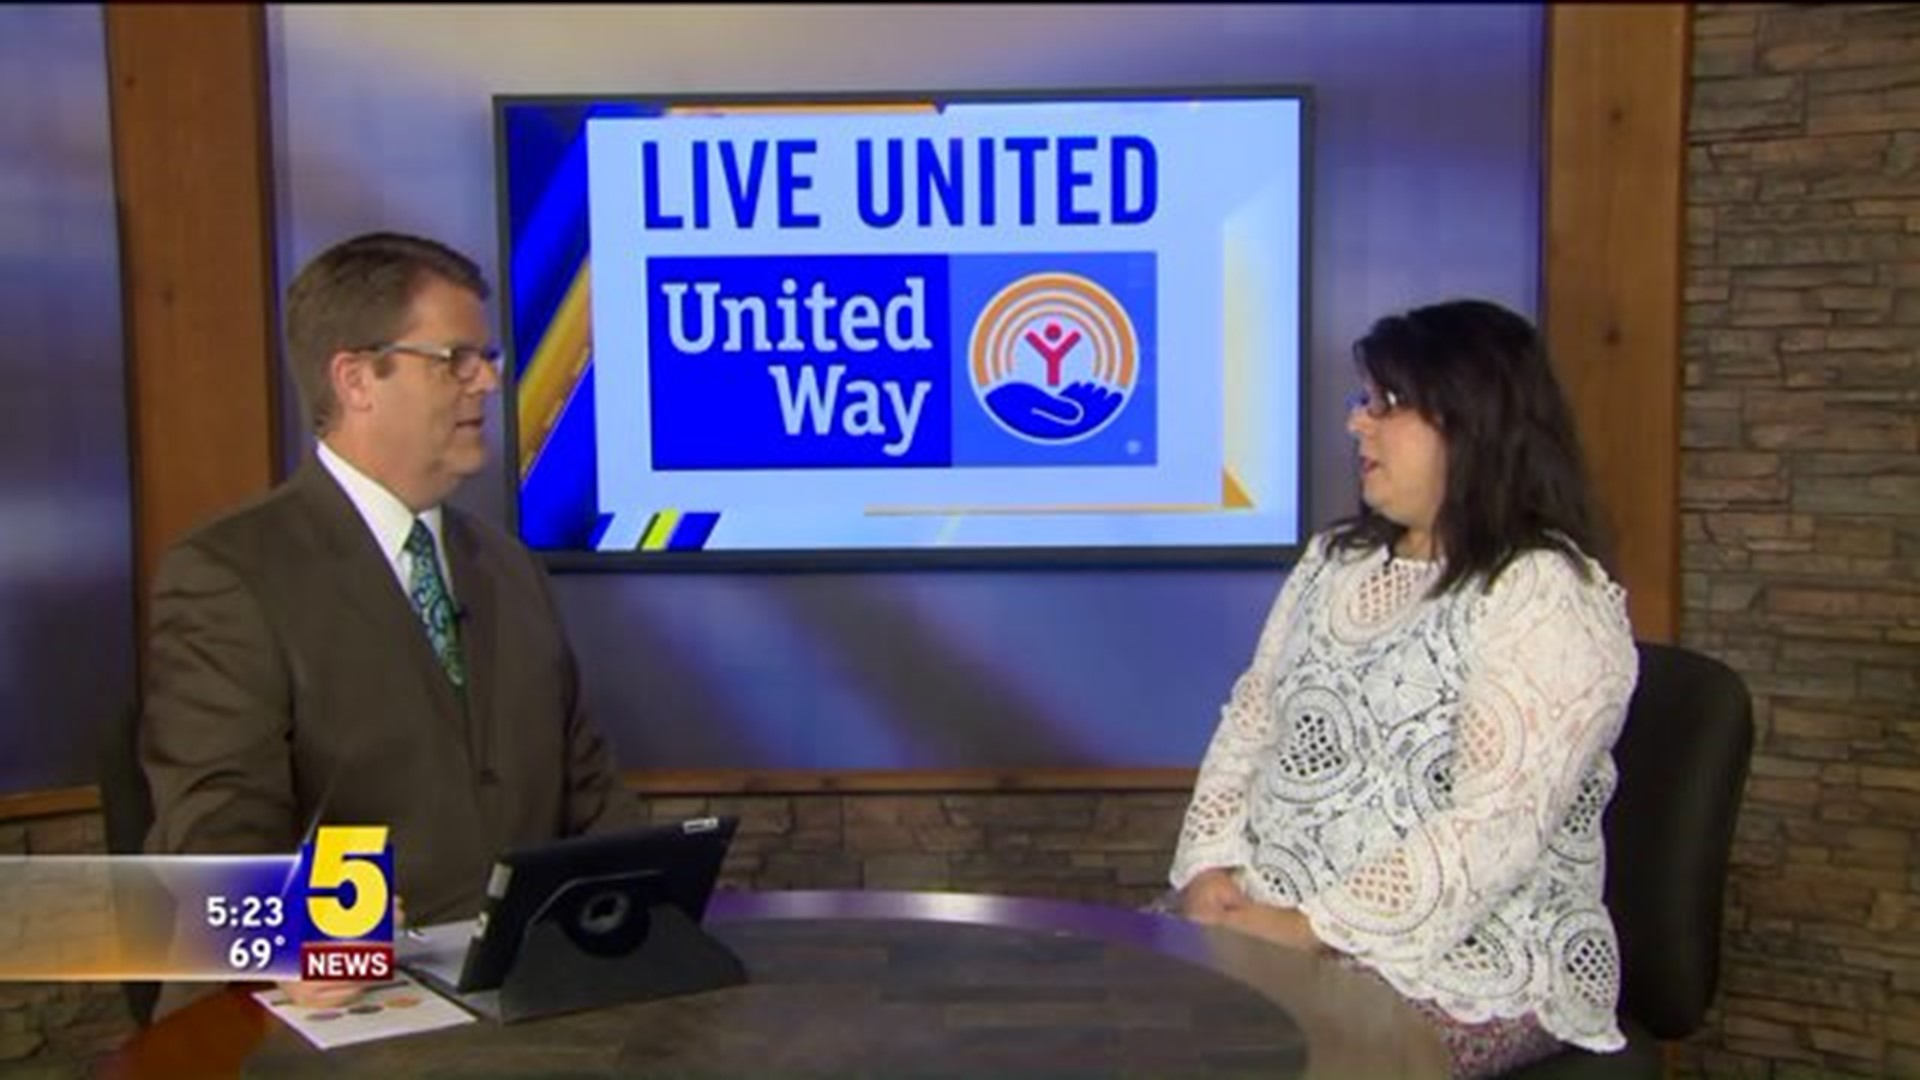 UNITED WAY FORT SMITH